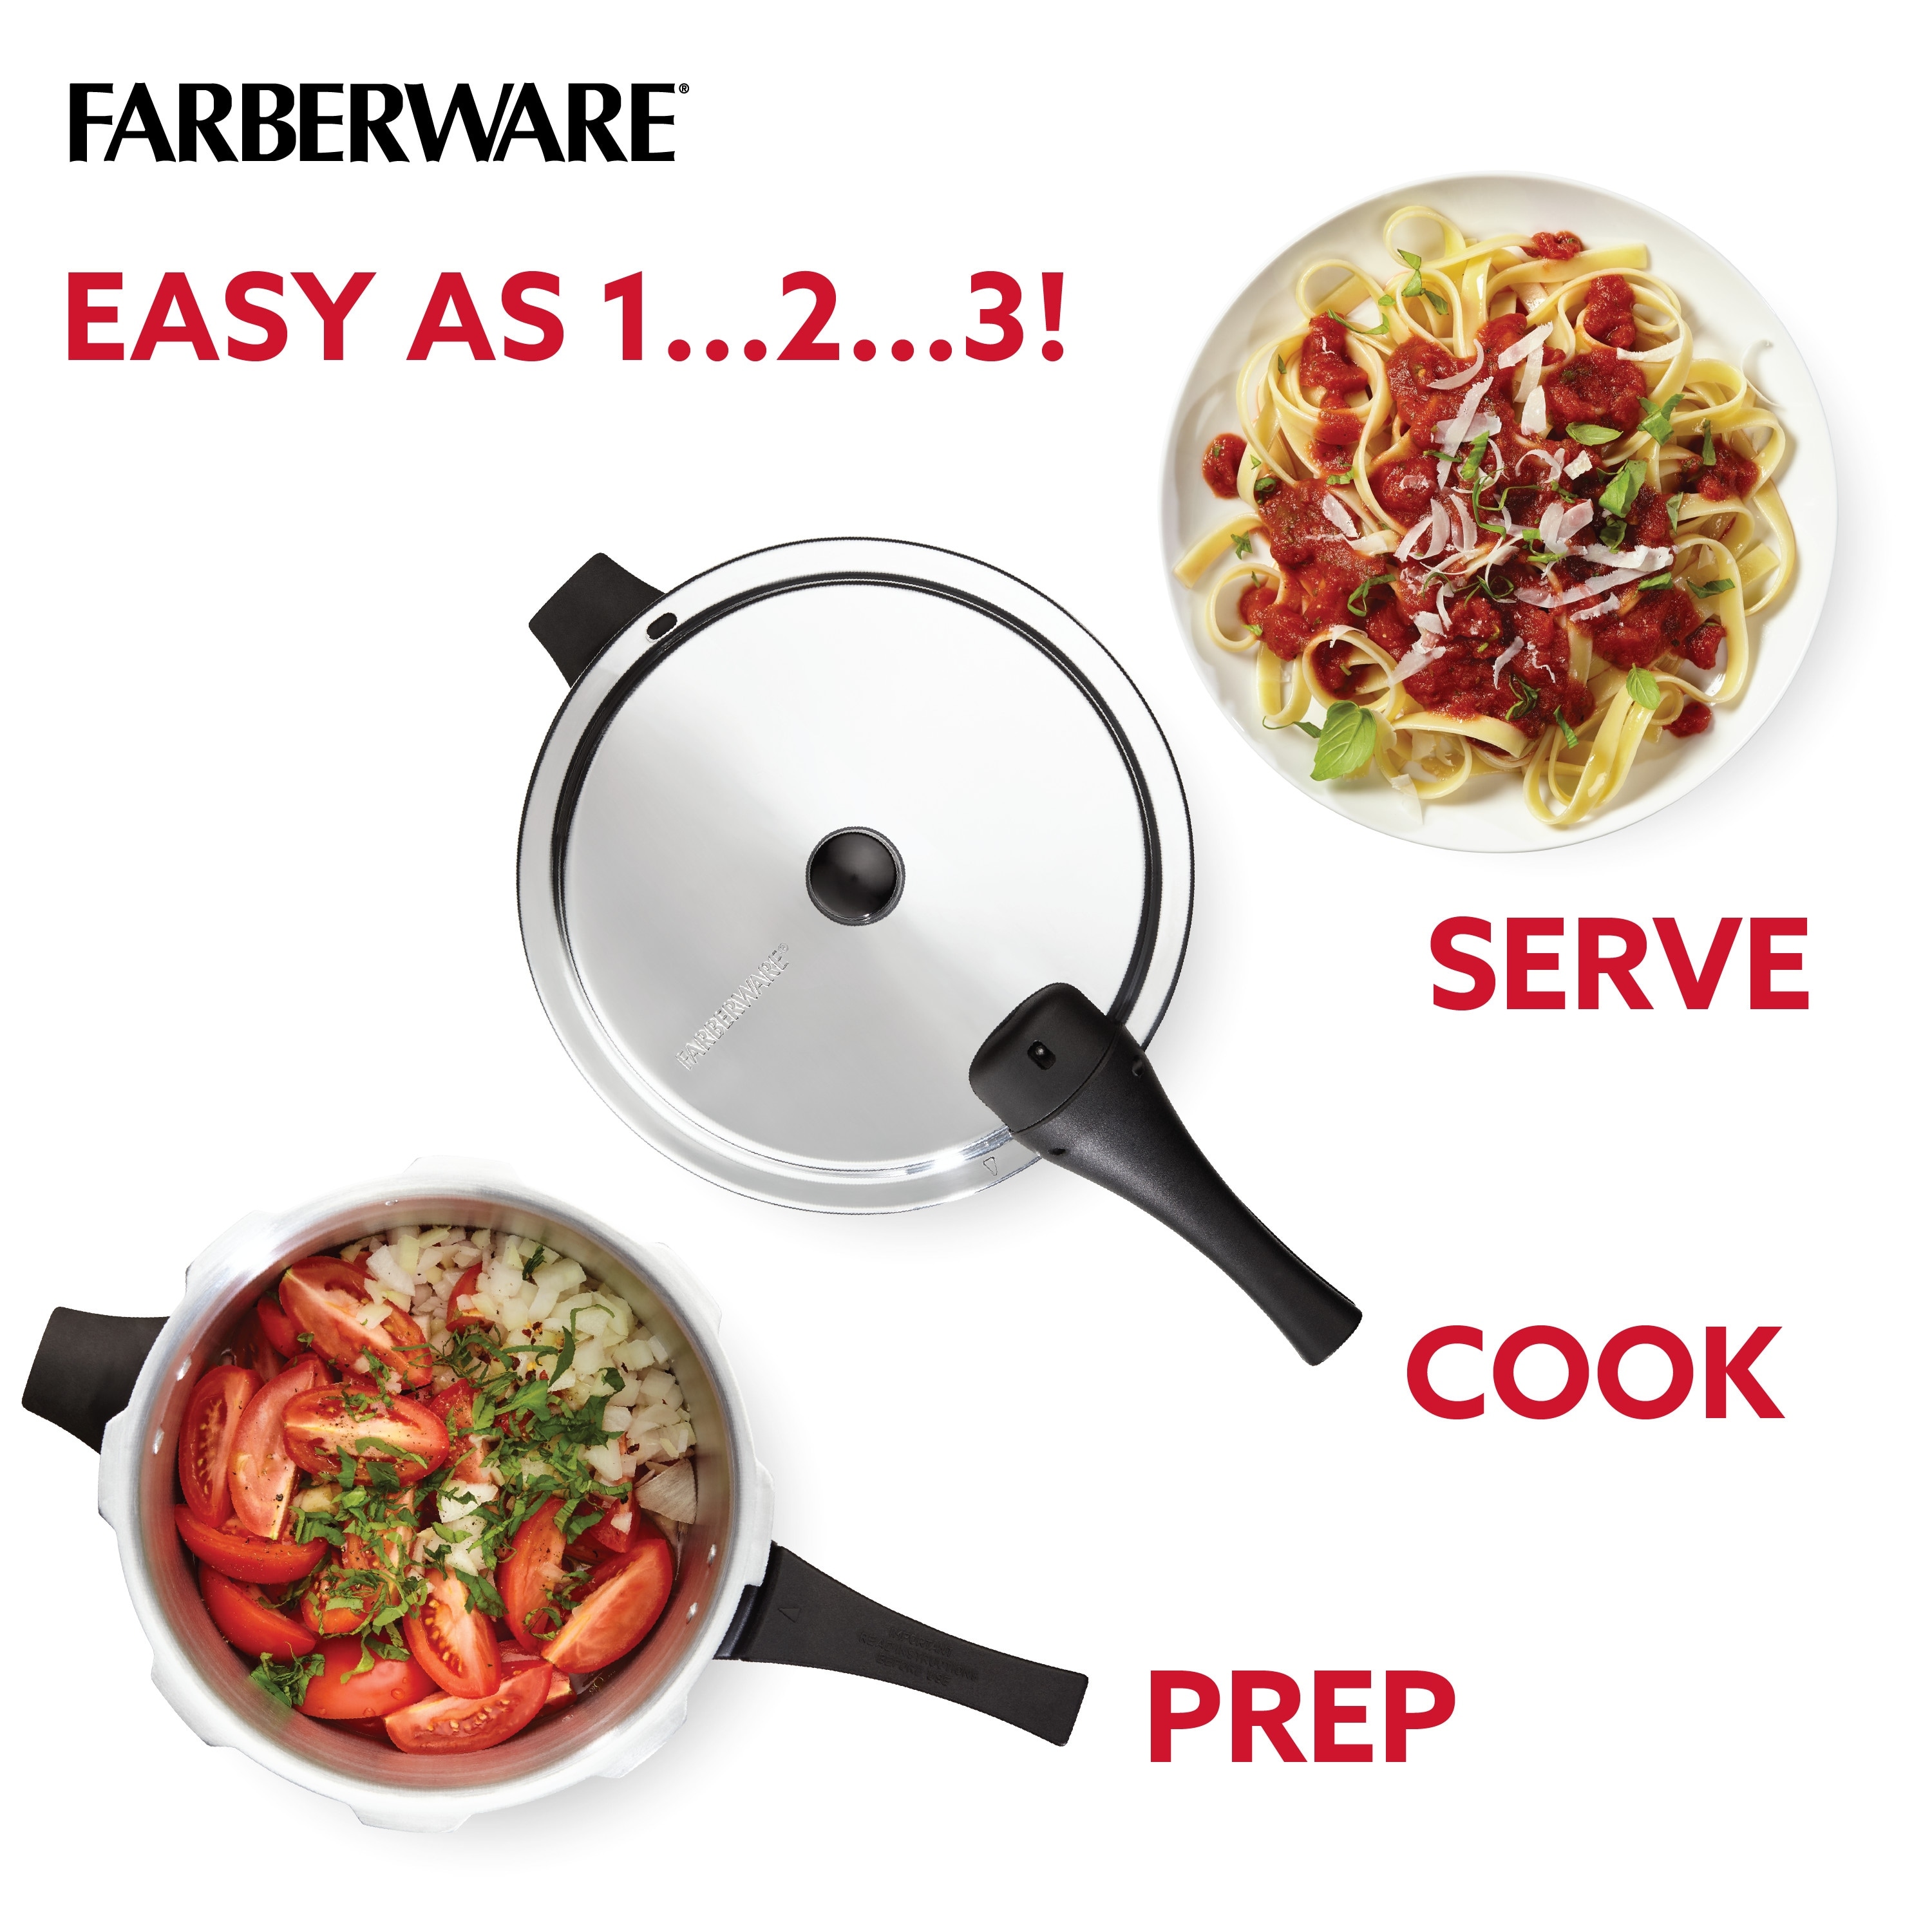 https://ak1.ostkcdn.com/images/products/is/images/direct/770ded5ee9c6f67f0c857d7a18d26f516fa5b6ce/Farberware-Stainless-Steel-Induction-Stovetop-Pressure-Cooker%2C-8-Quart.jpg